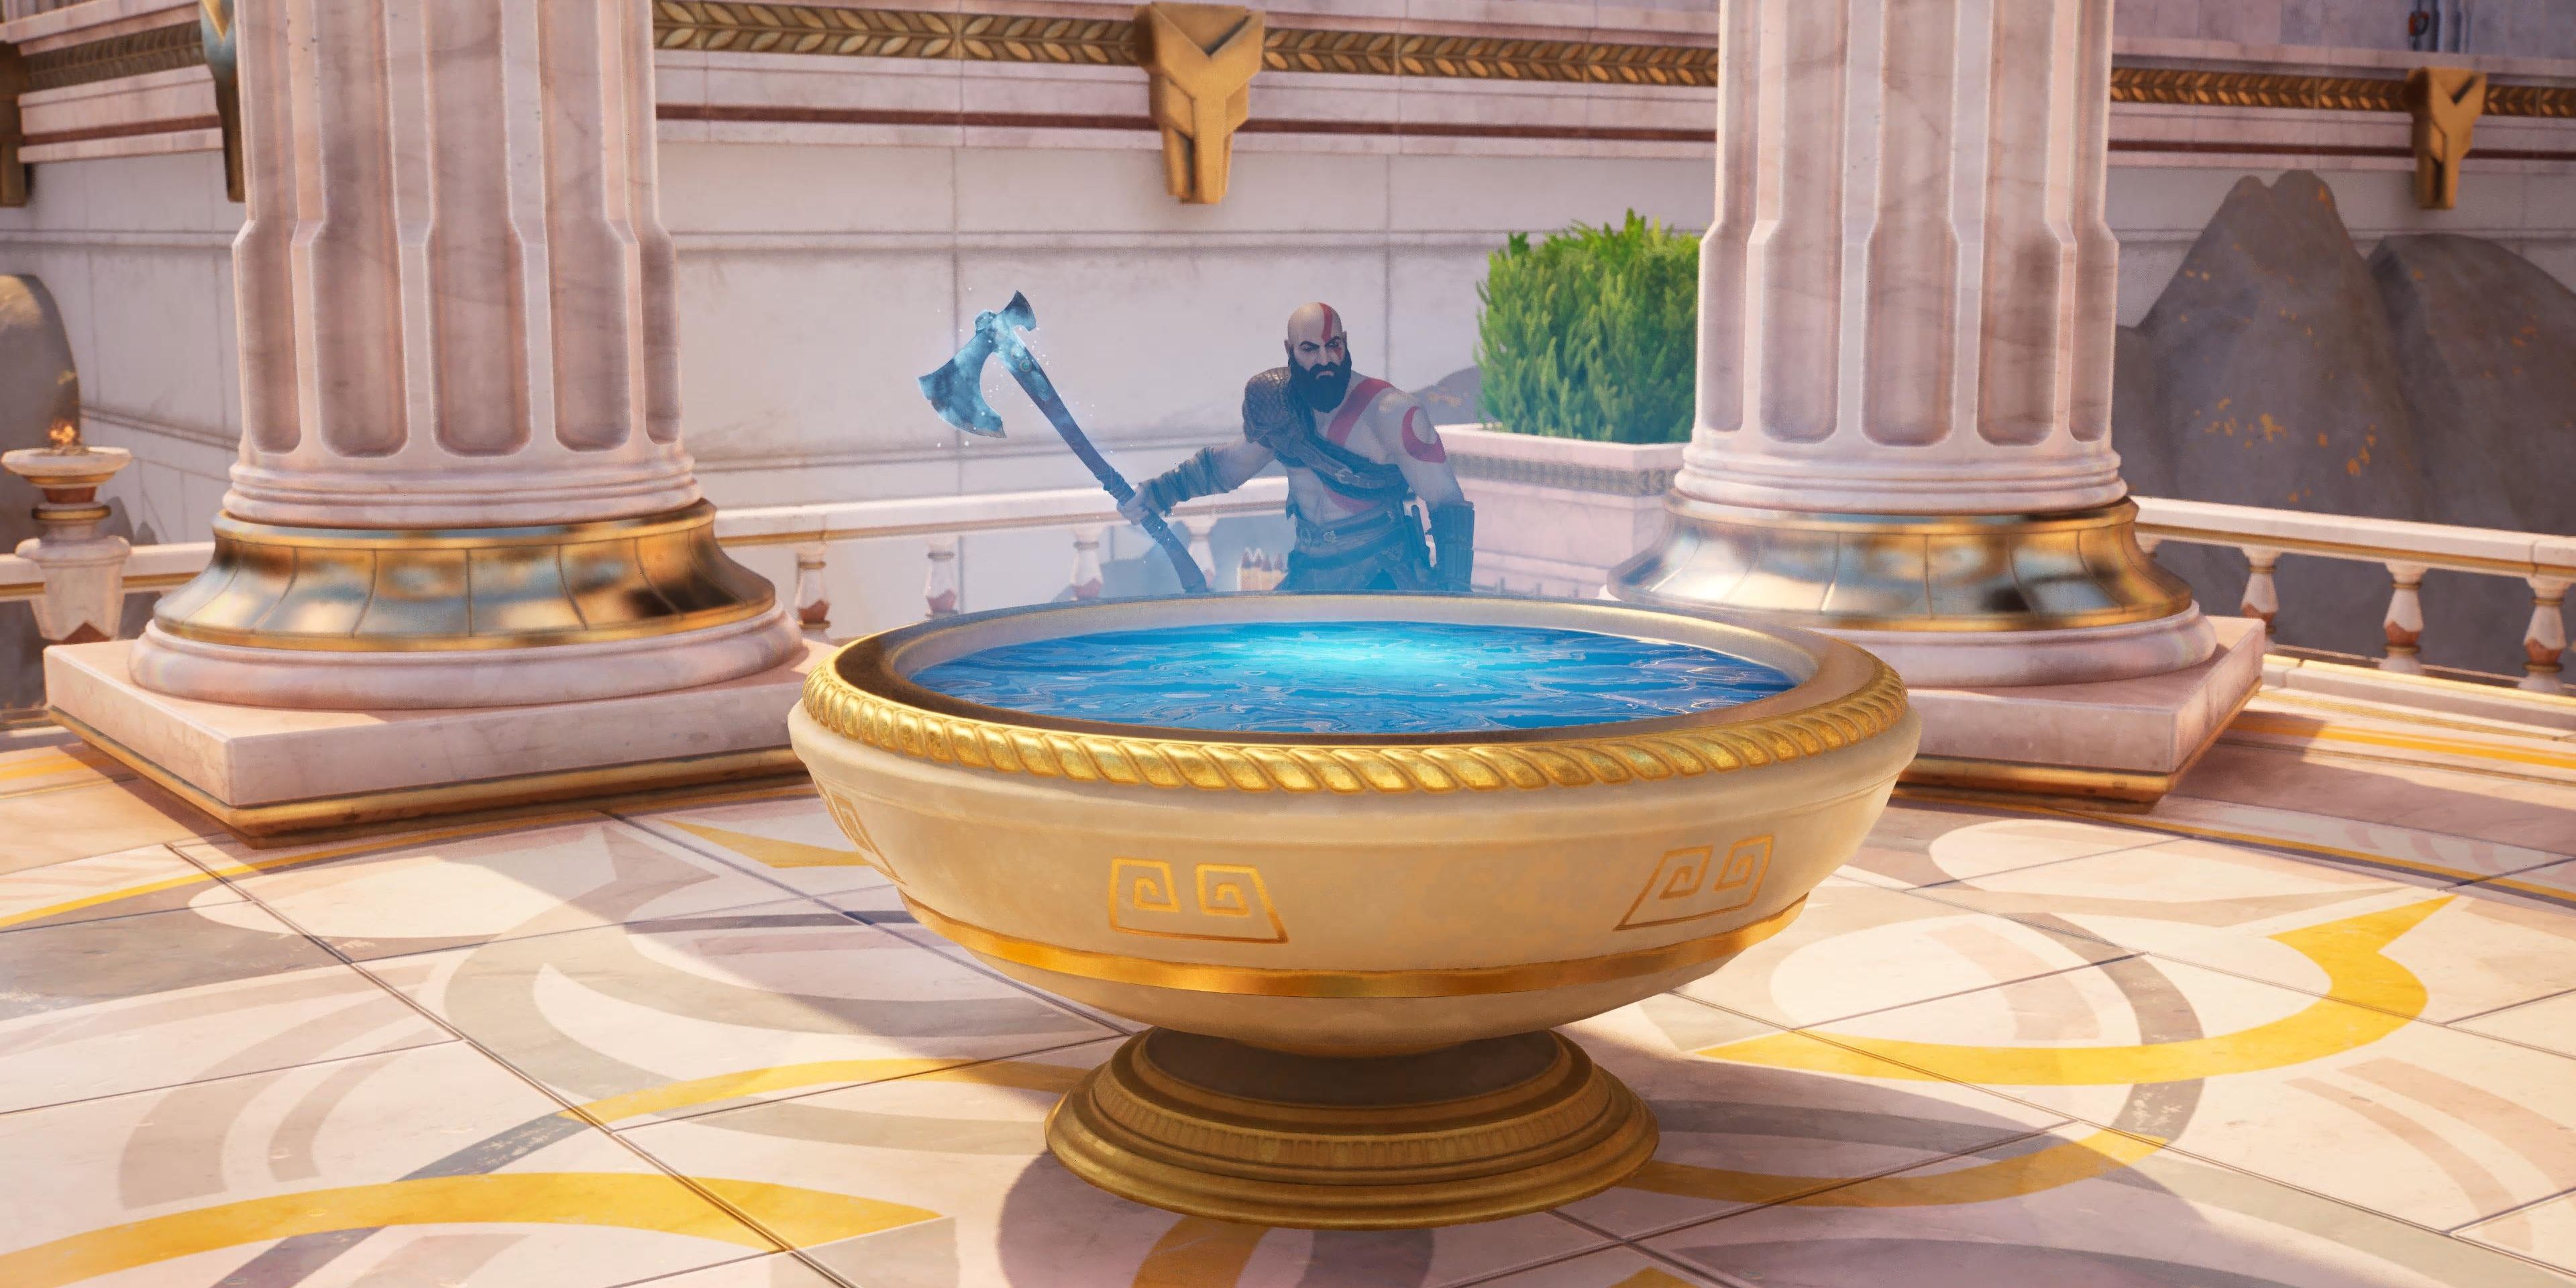 kratos at a scrying pool